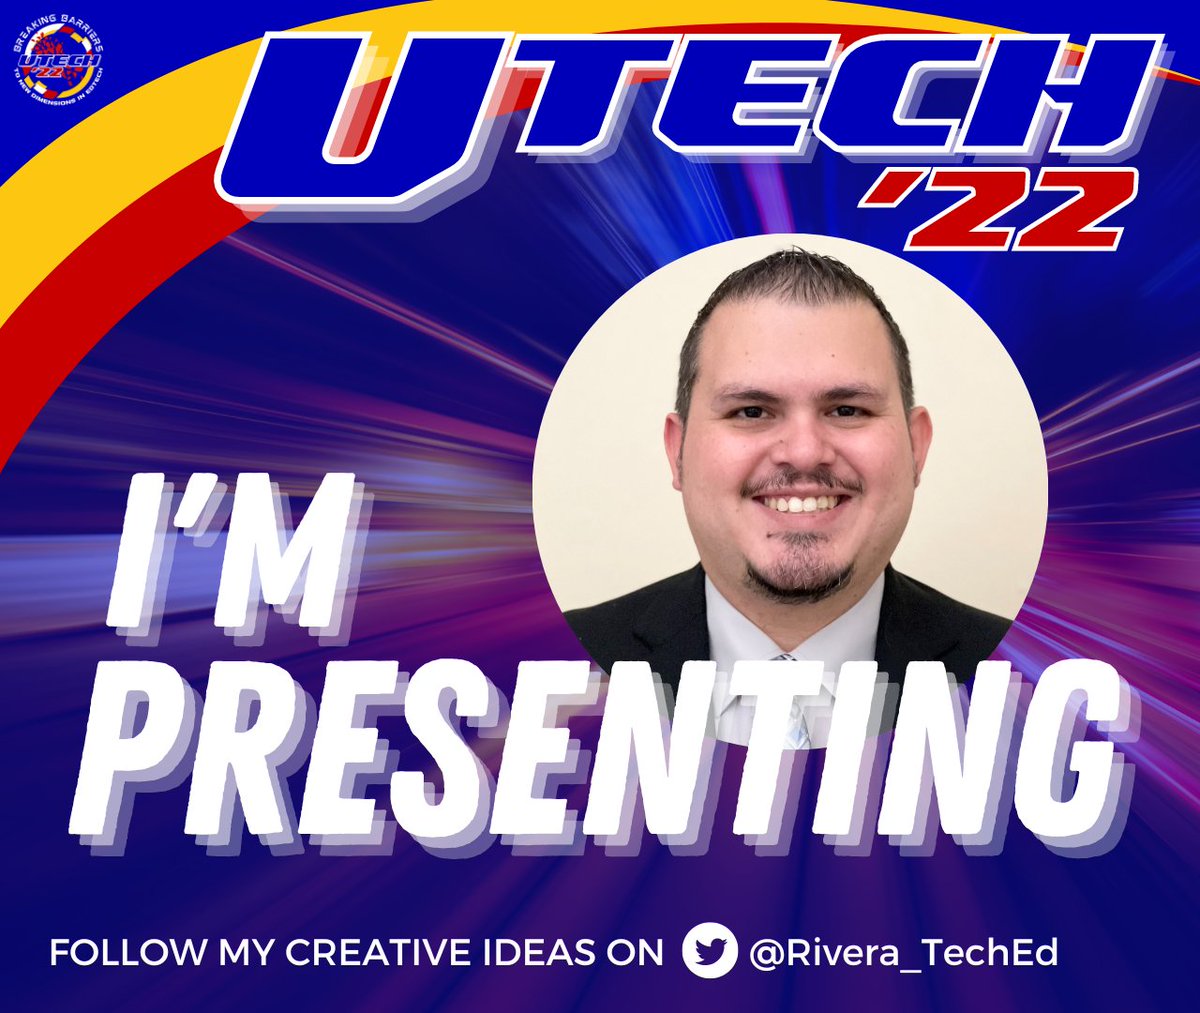 Looking to start an esports program at your school but don't know where to start? Come by my session at #UTECH22 hosted by @ESC1_LRI to learn how! #EsportsEDU